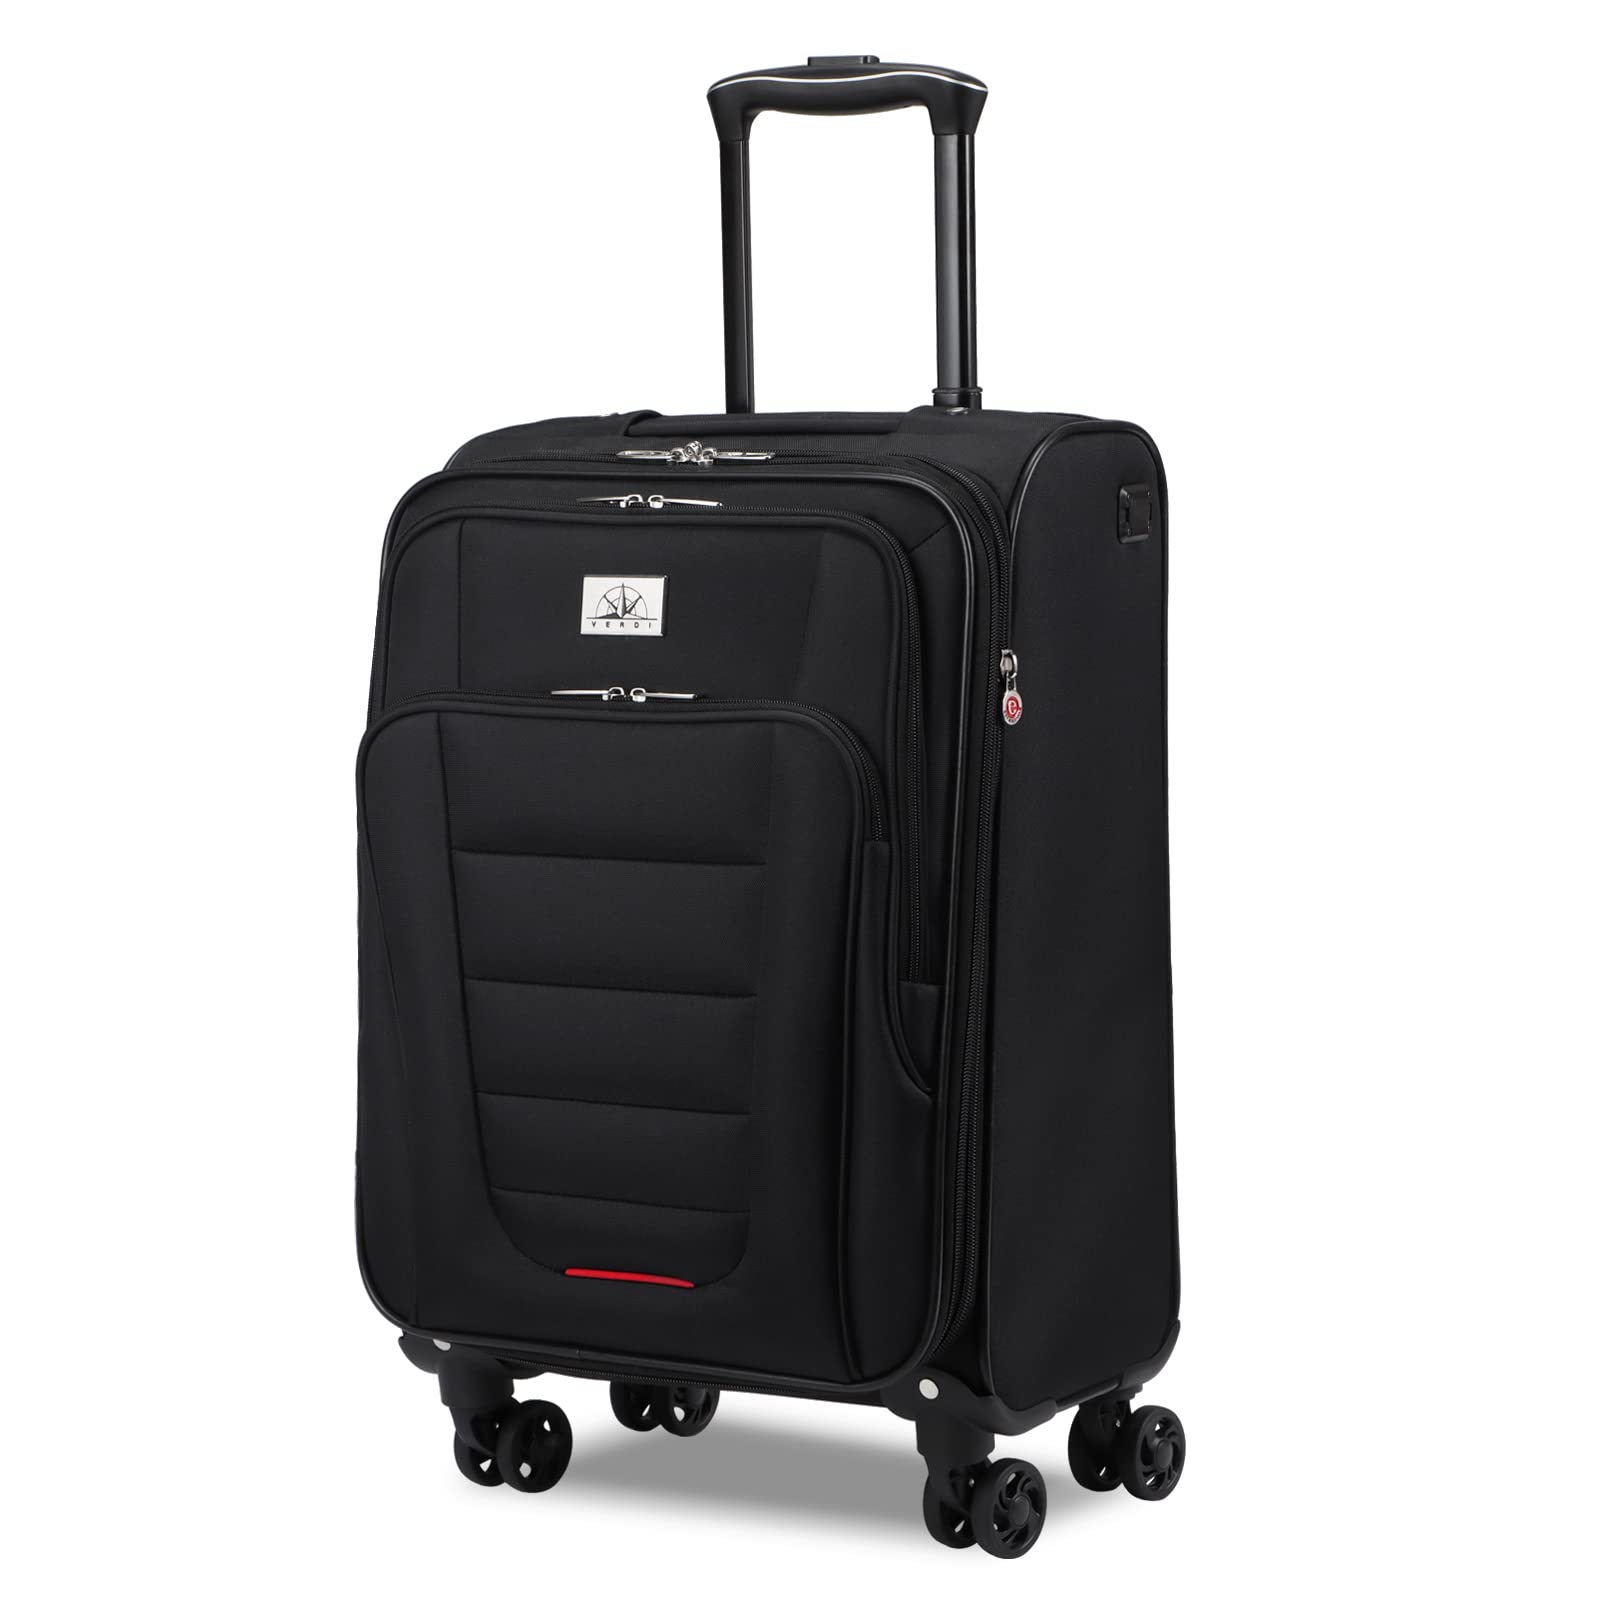 Verdi Travel carry On Luggage with Spinner Wheels Softshell Lightweight Expandable 20 Inch Suitcase with USB charging Port and 8